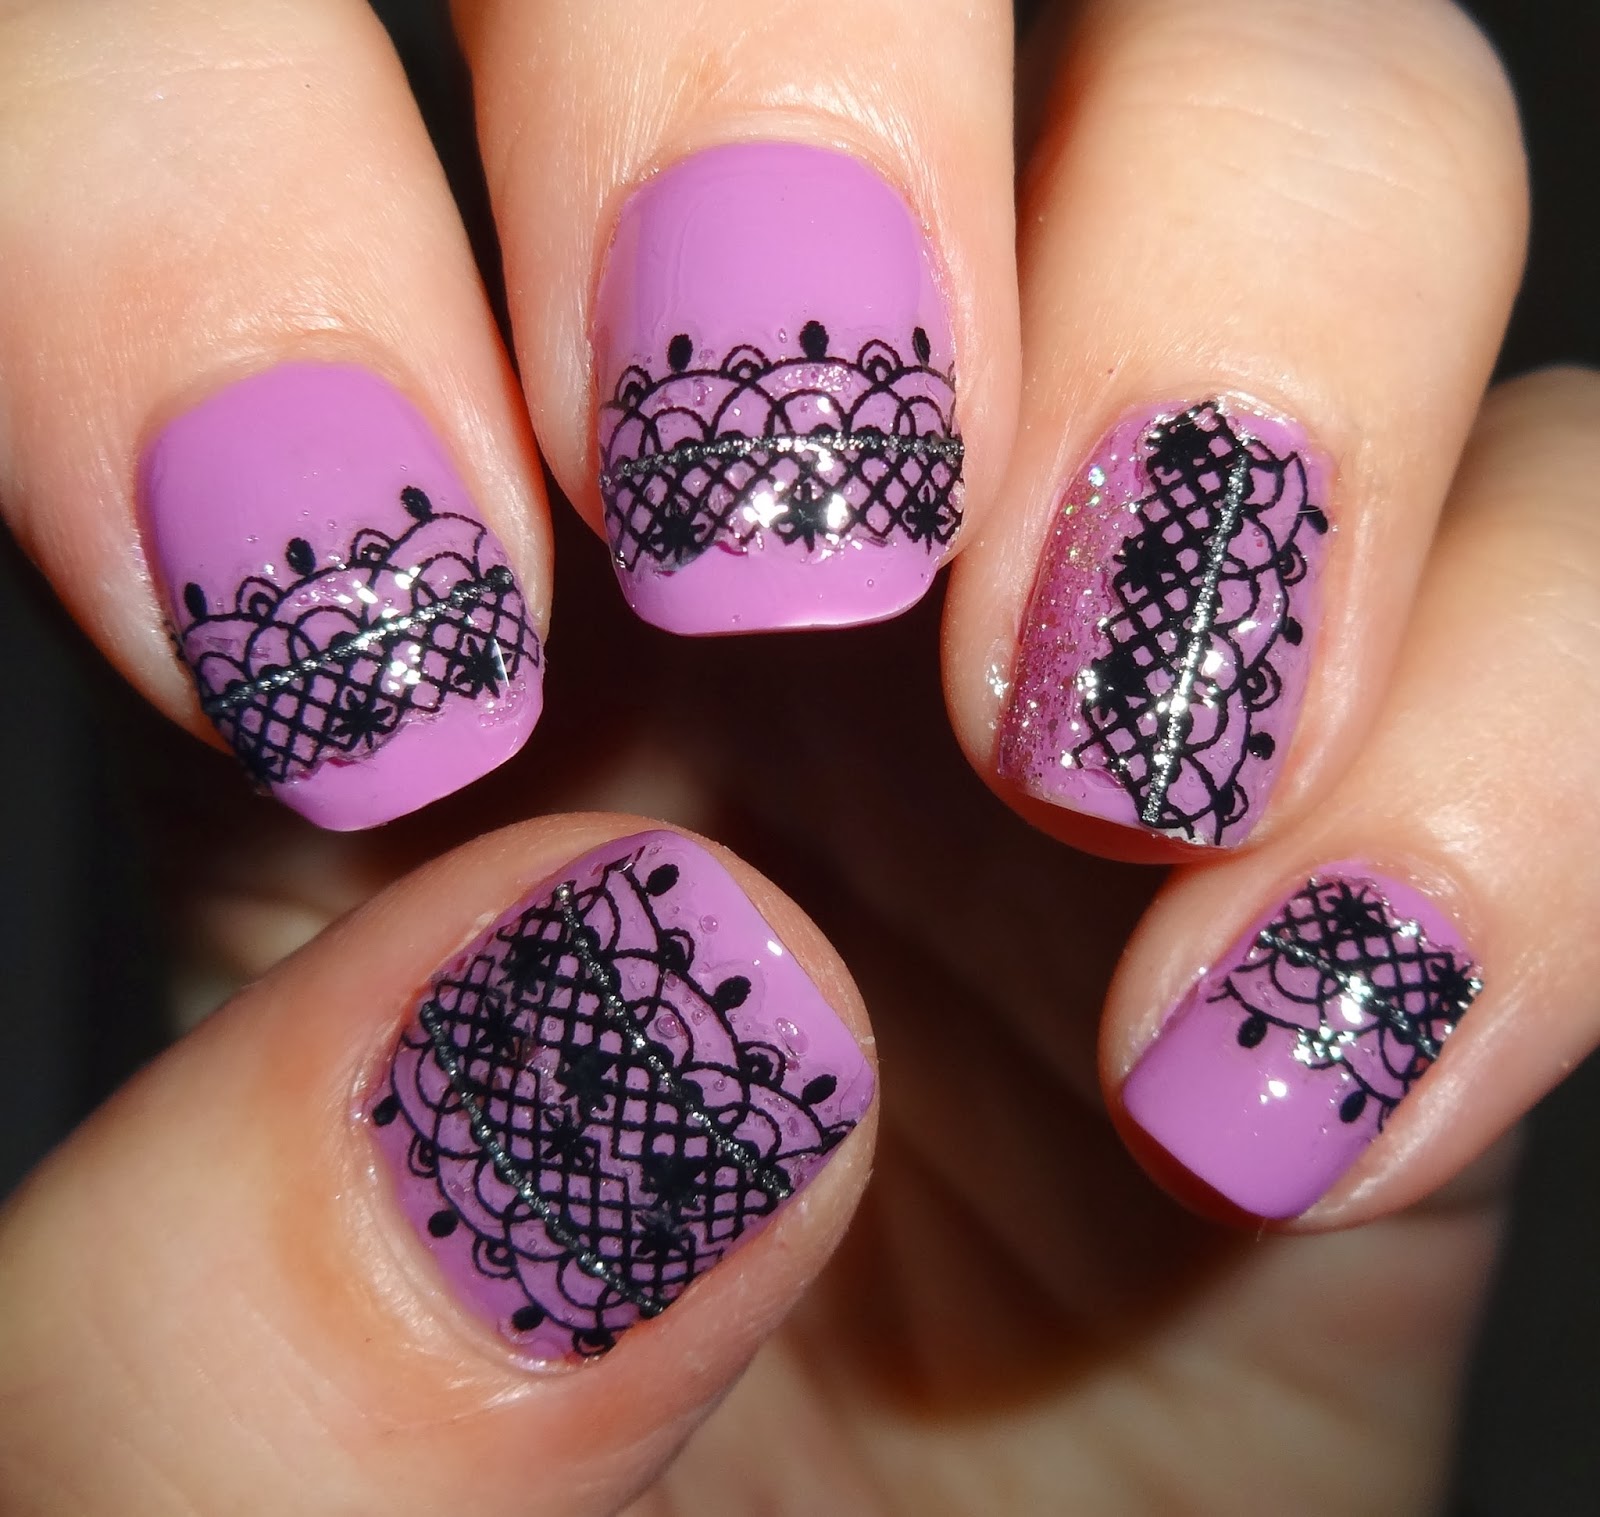 Wendy's Delights: Sparkly Nails Midnight Lace Nail Stickers